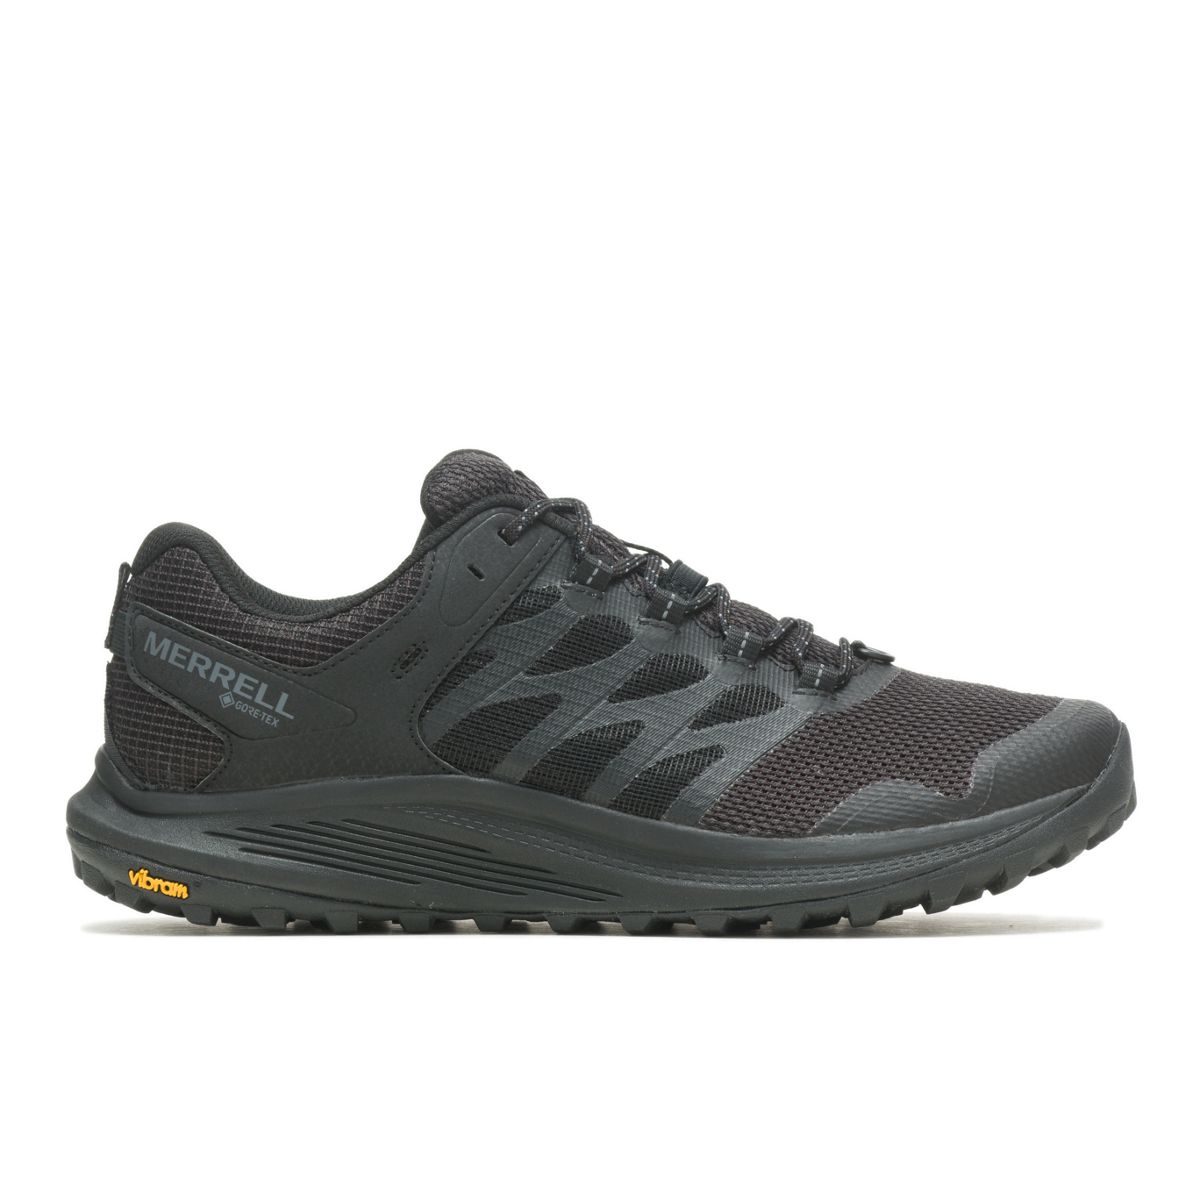 Discount Men's Clothing & Running Shoes on Sale | Merrell